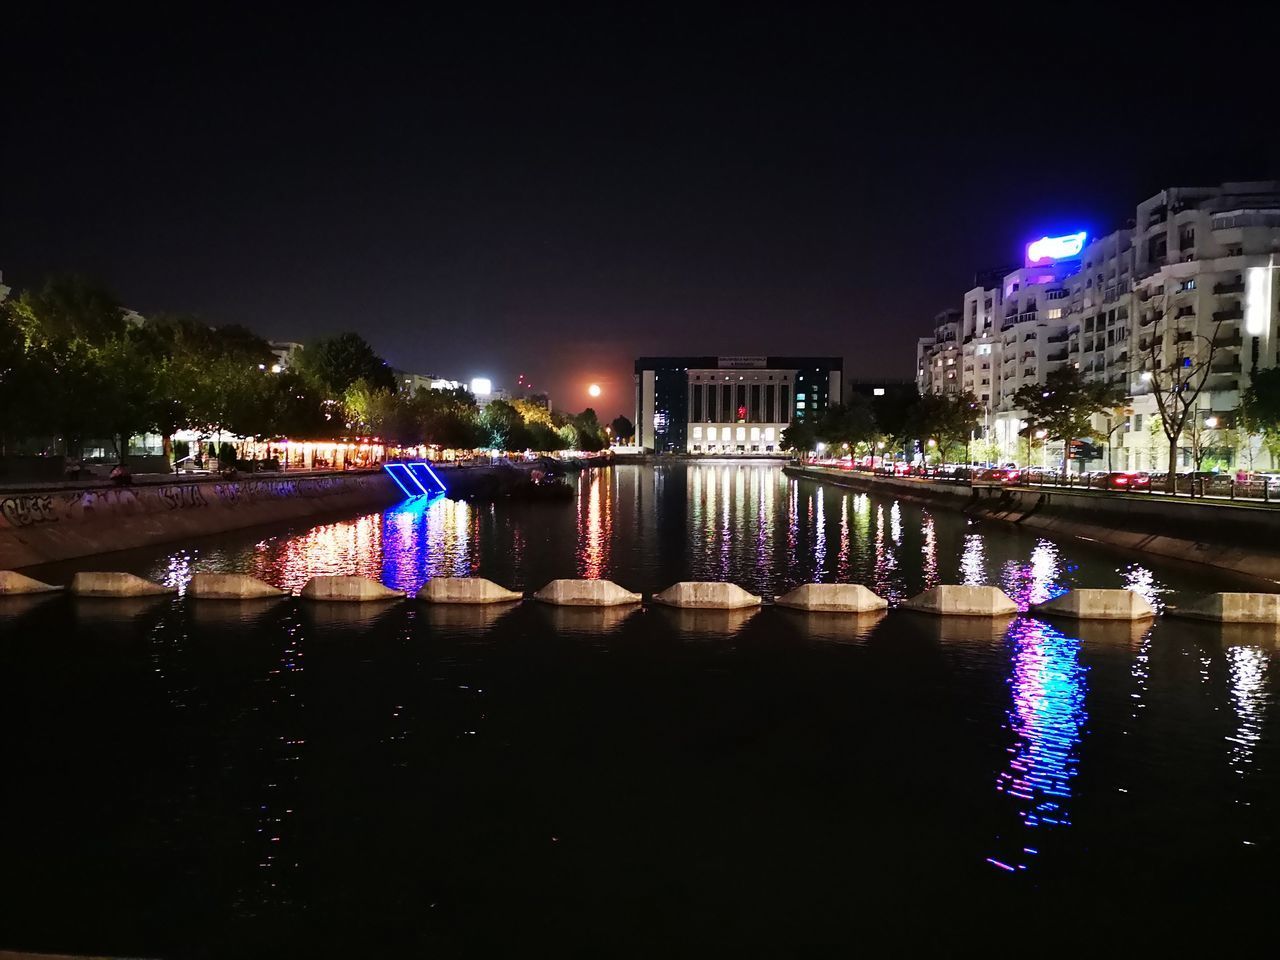 ILLUMINATED BUILDINGS BY RIVER AT NIGHT